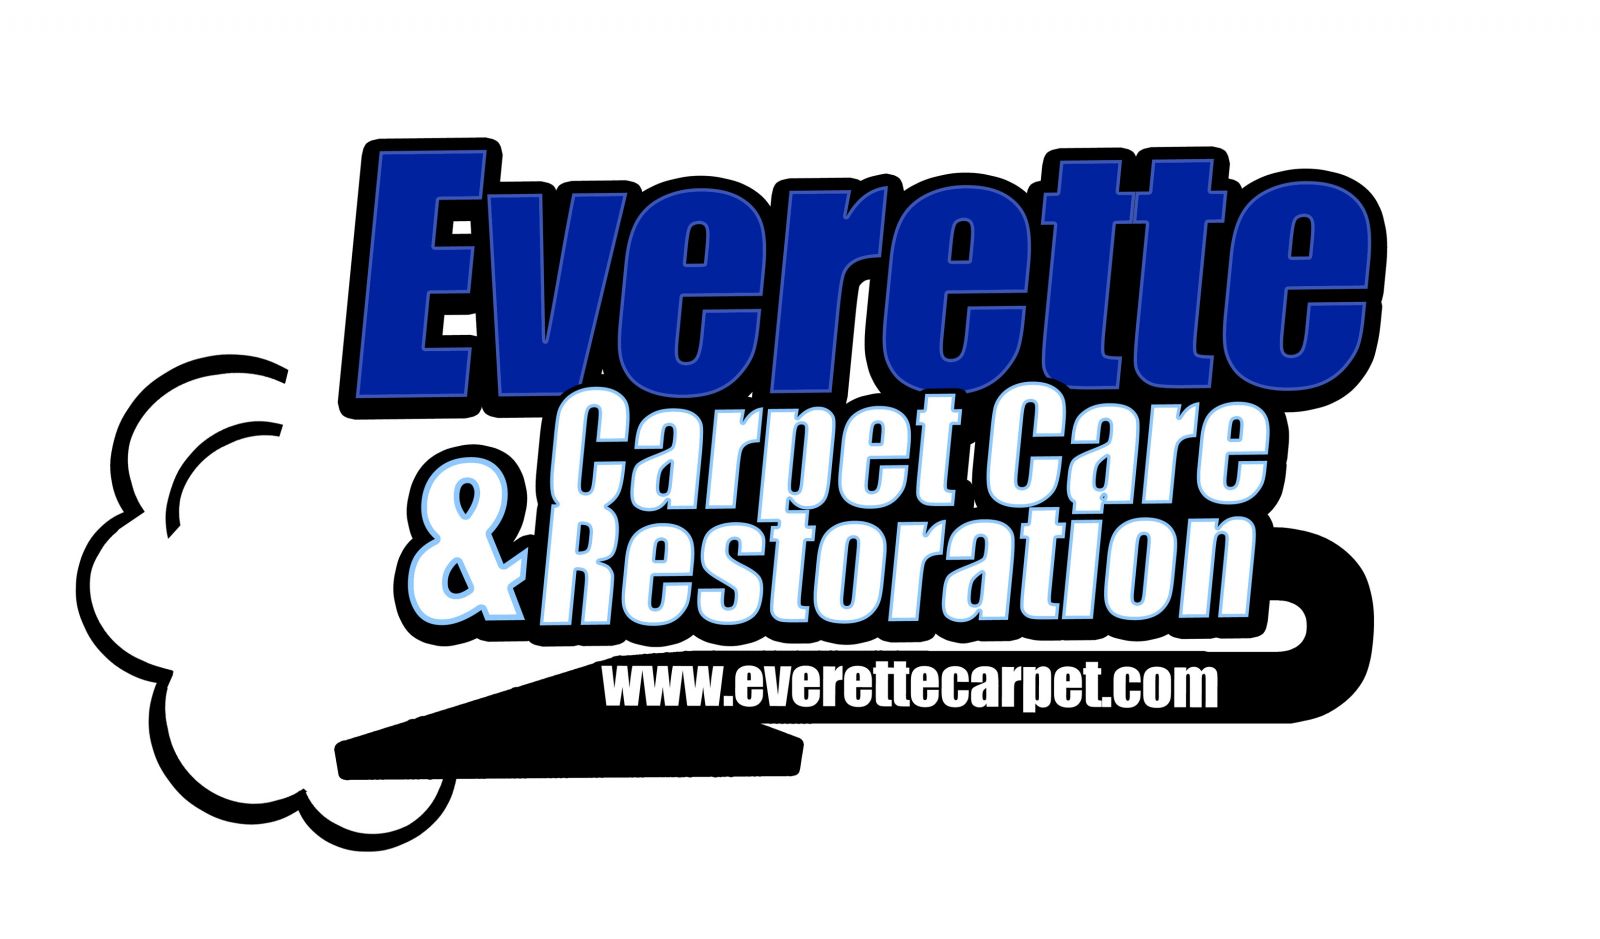 Carpet Cleaning Woodbride 22191 Carpet Cleaning Fairfax 22033